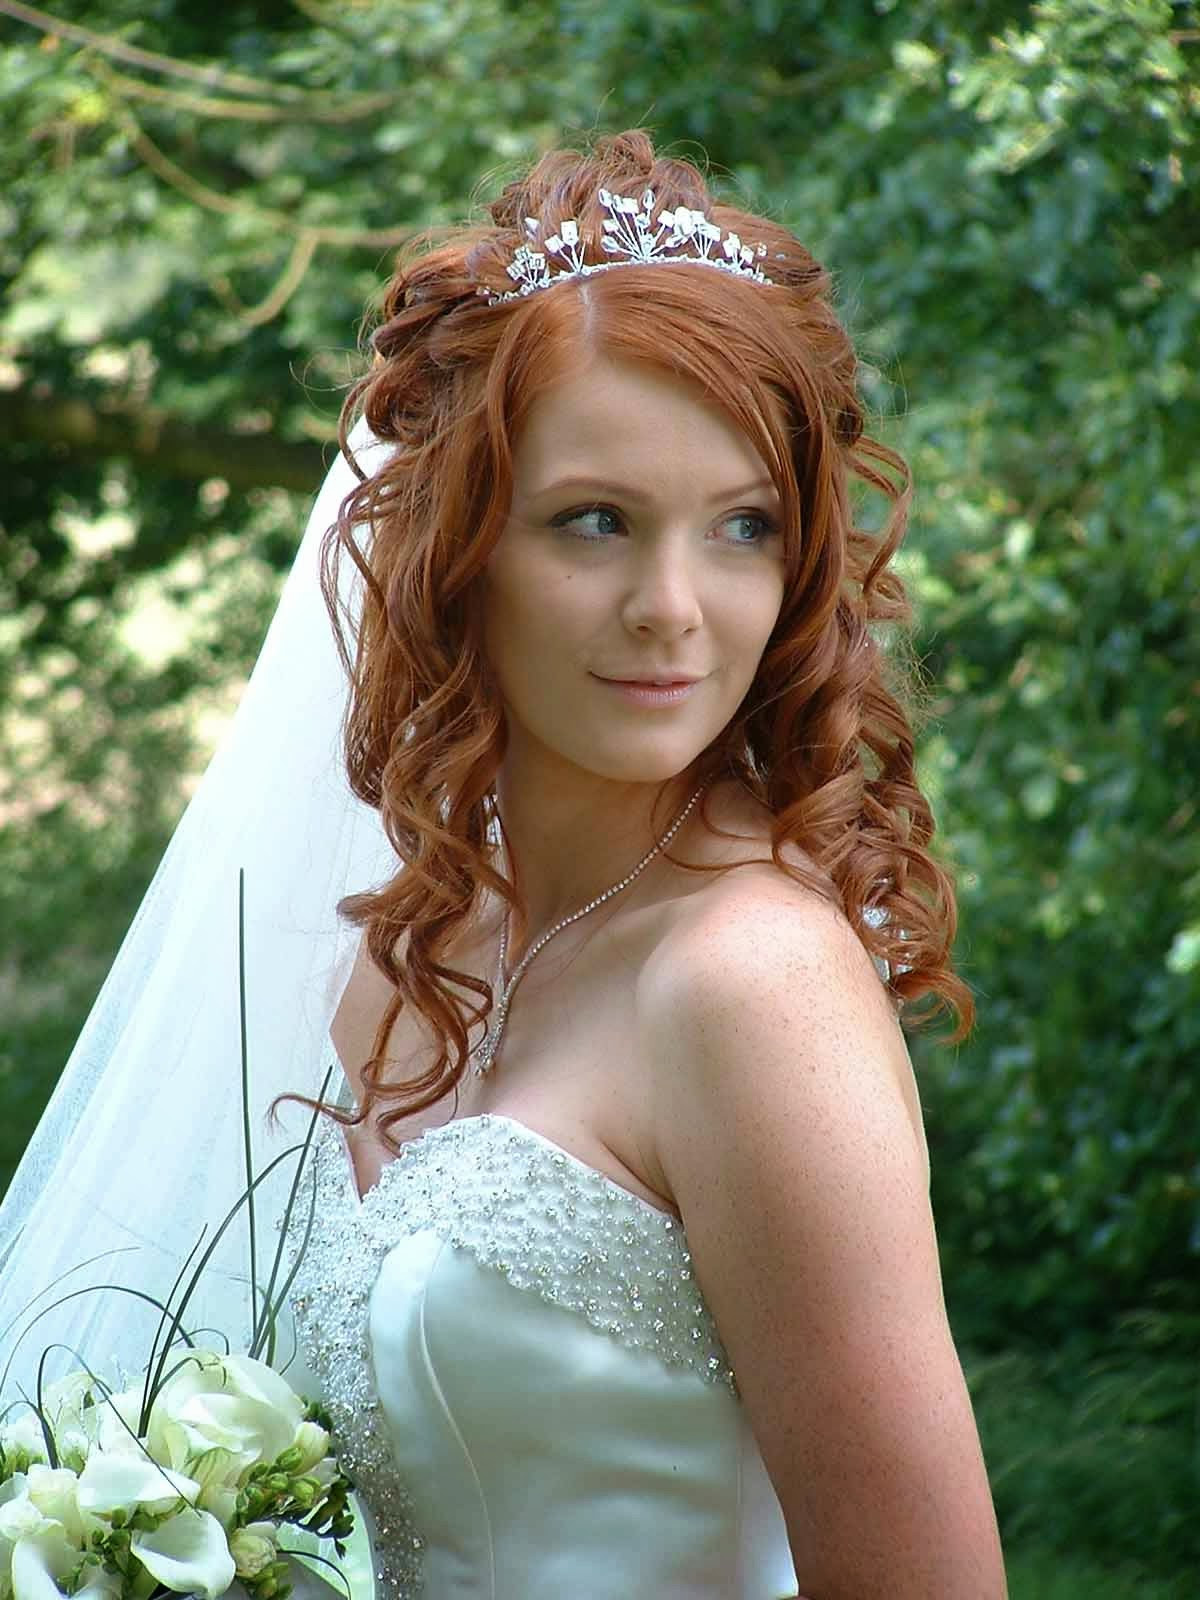 Hairstyles With Tiaras For Brides
 Wedding Hairstyles With Tiara 2014